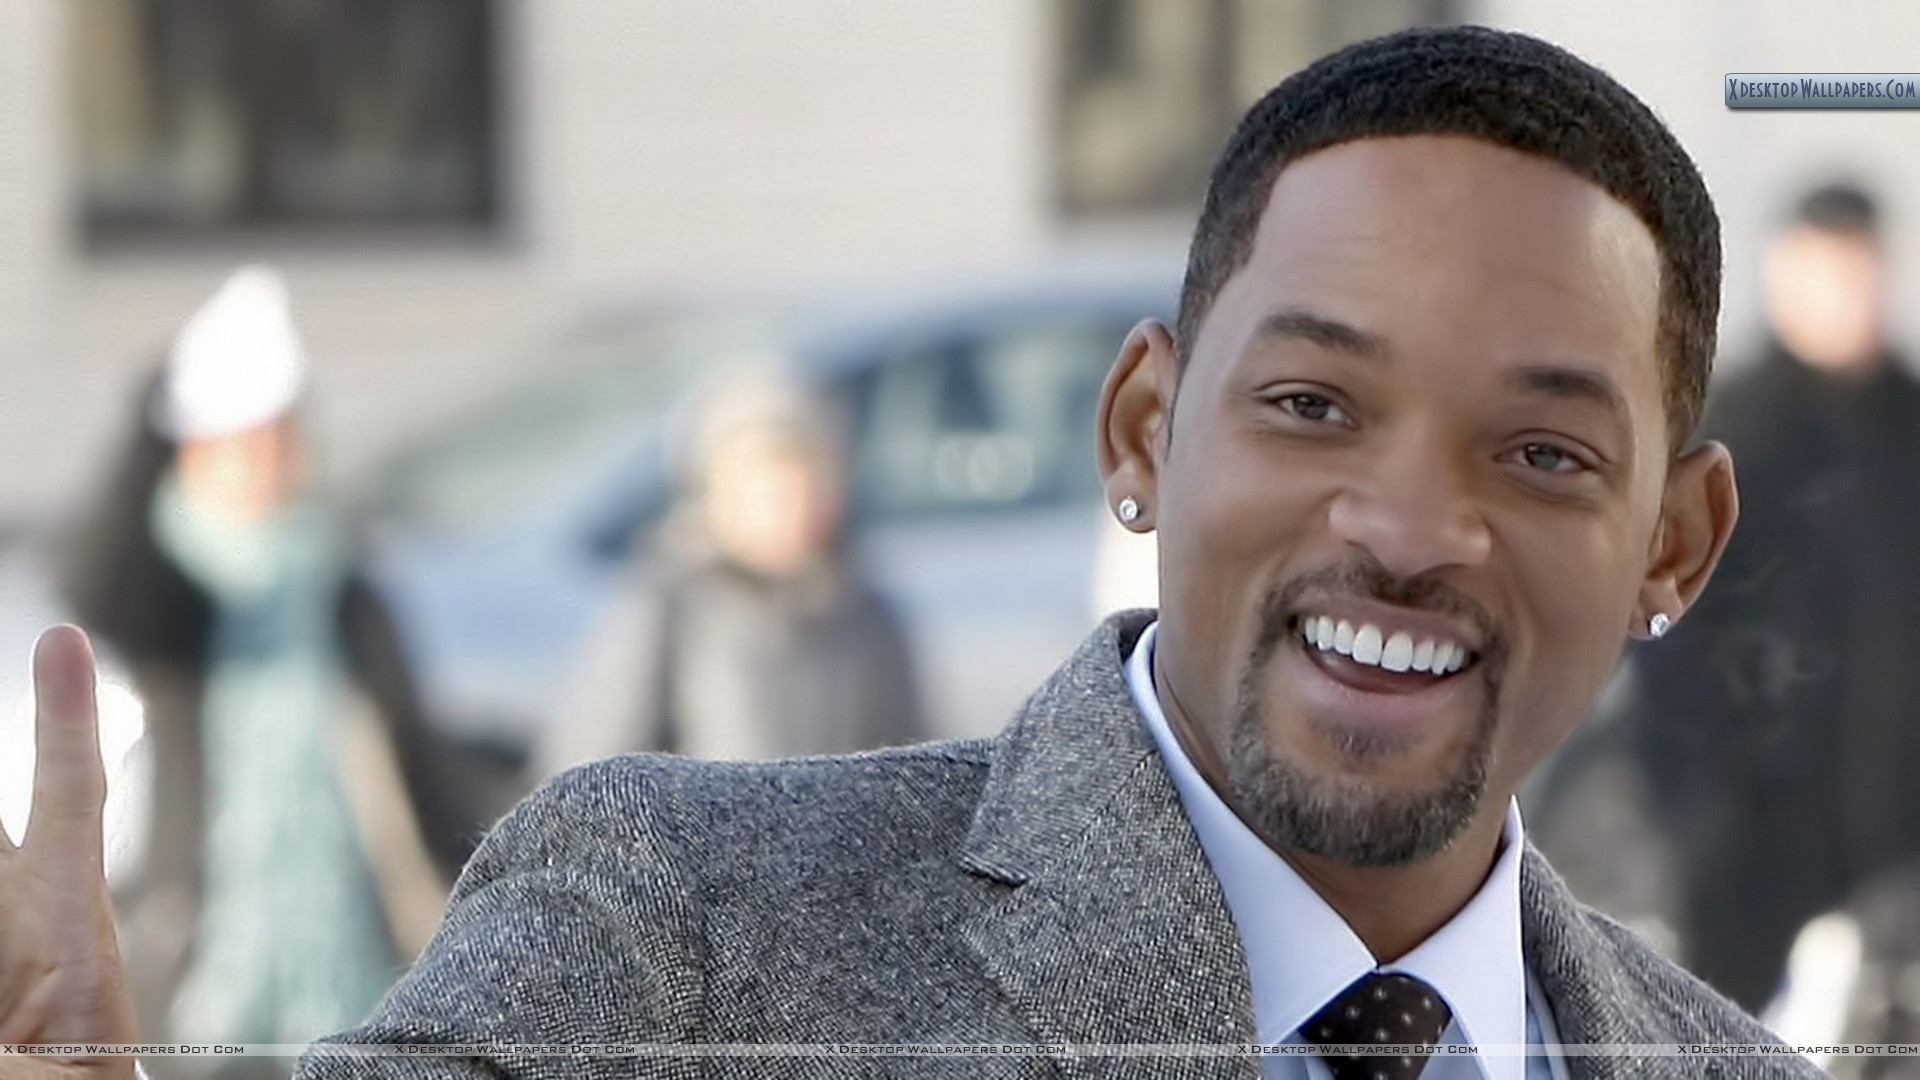 1920x1080 You are viewing wallpaper titled "Will Smith ...